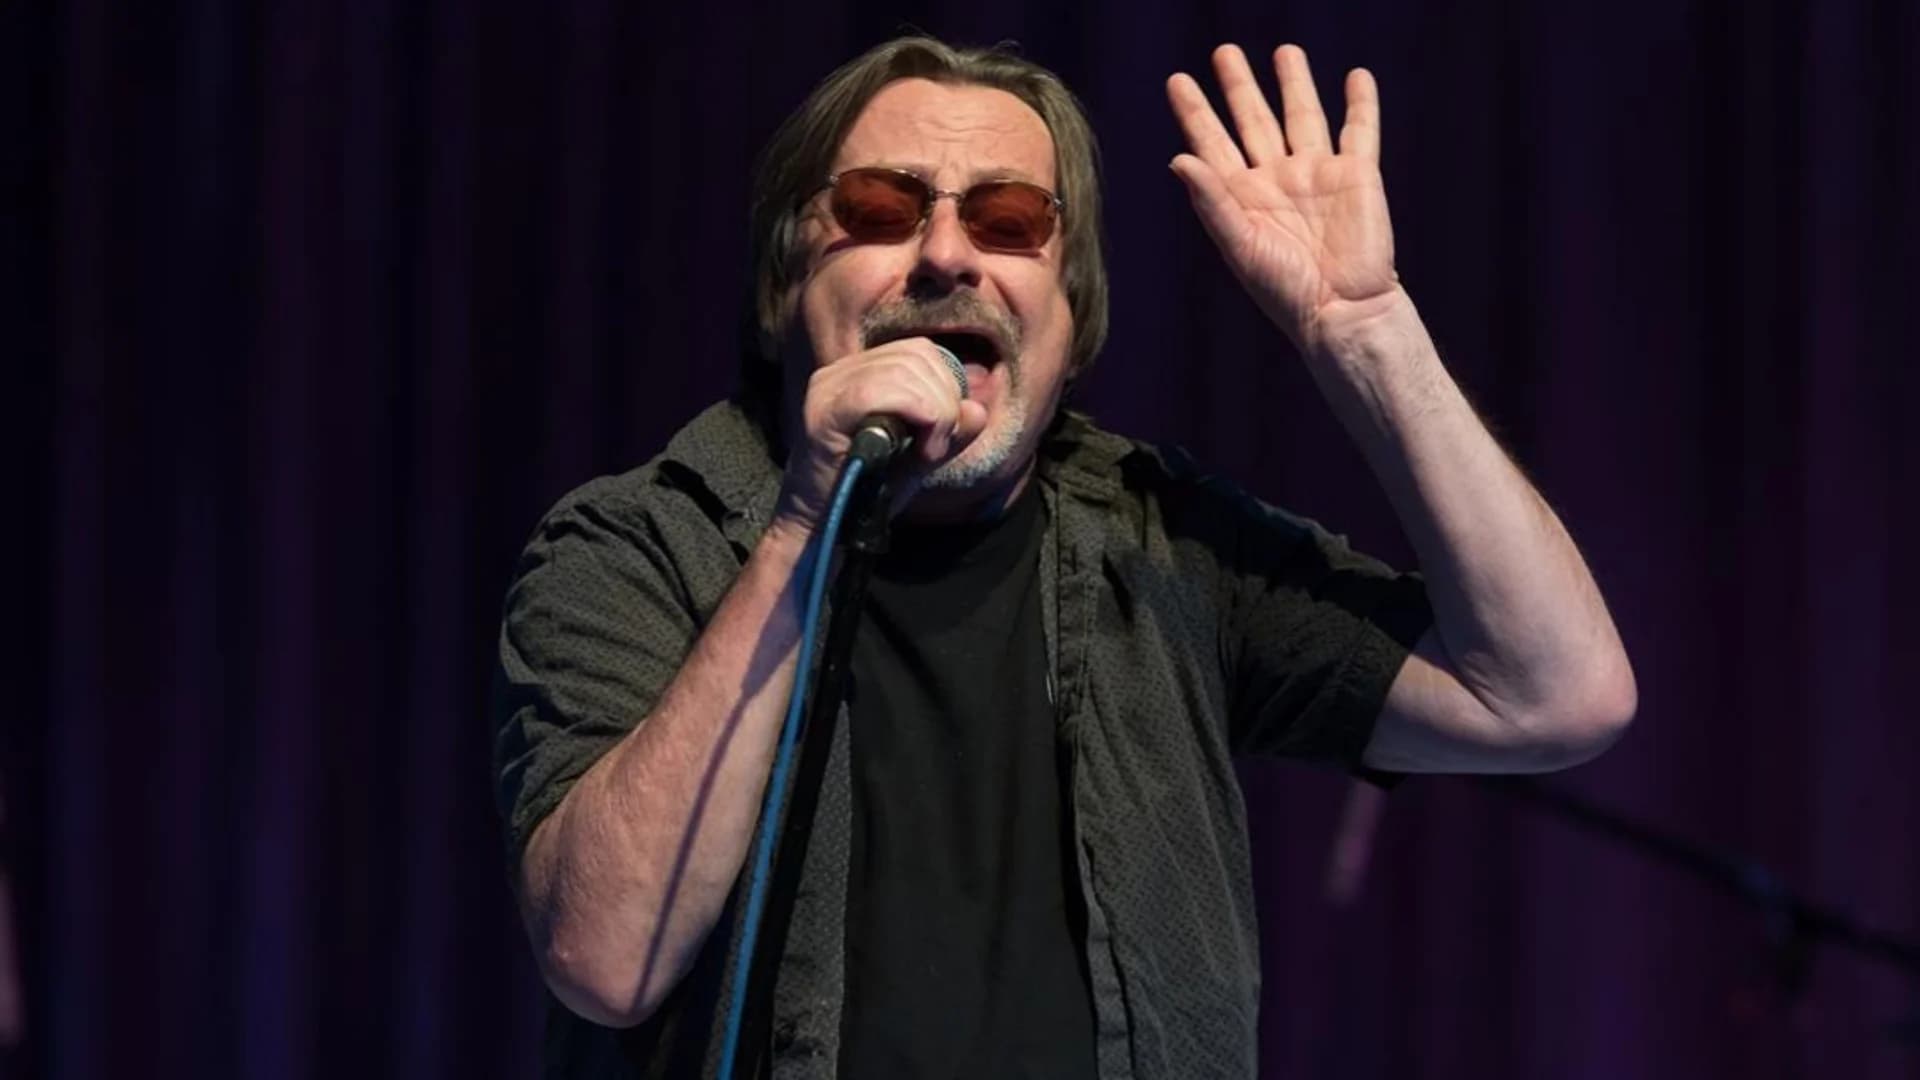 PHOTOS: Southside Johnny and the Asbury Jukes